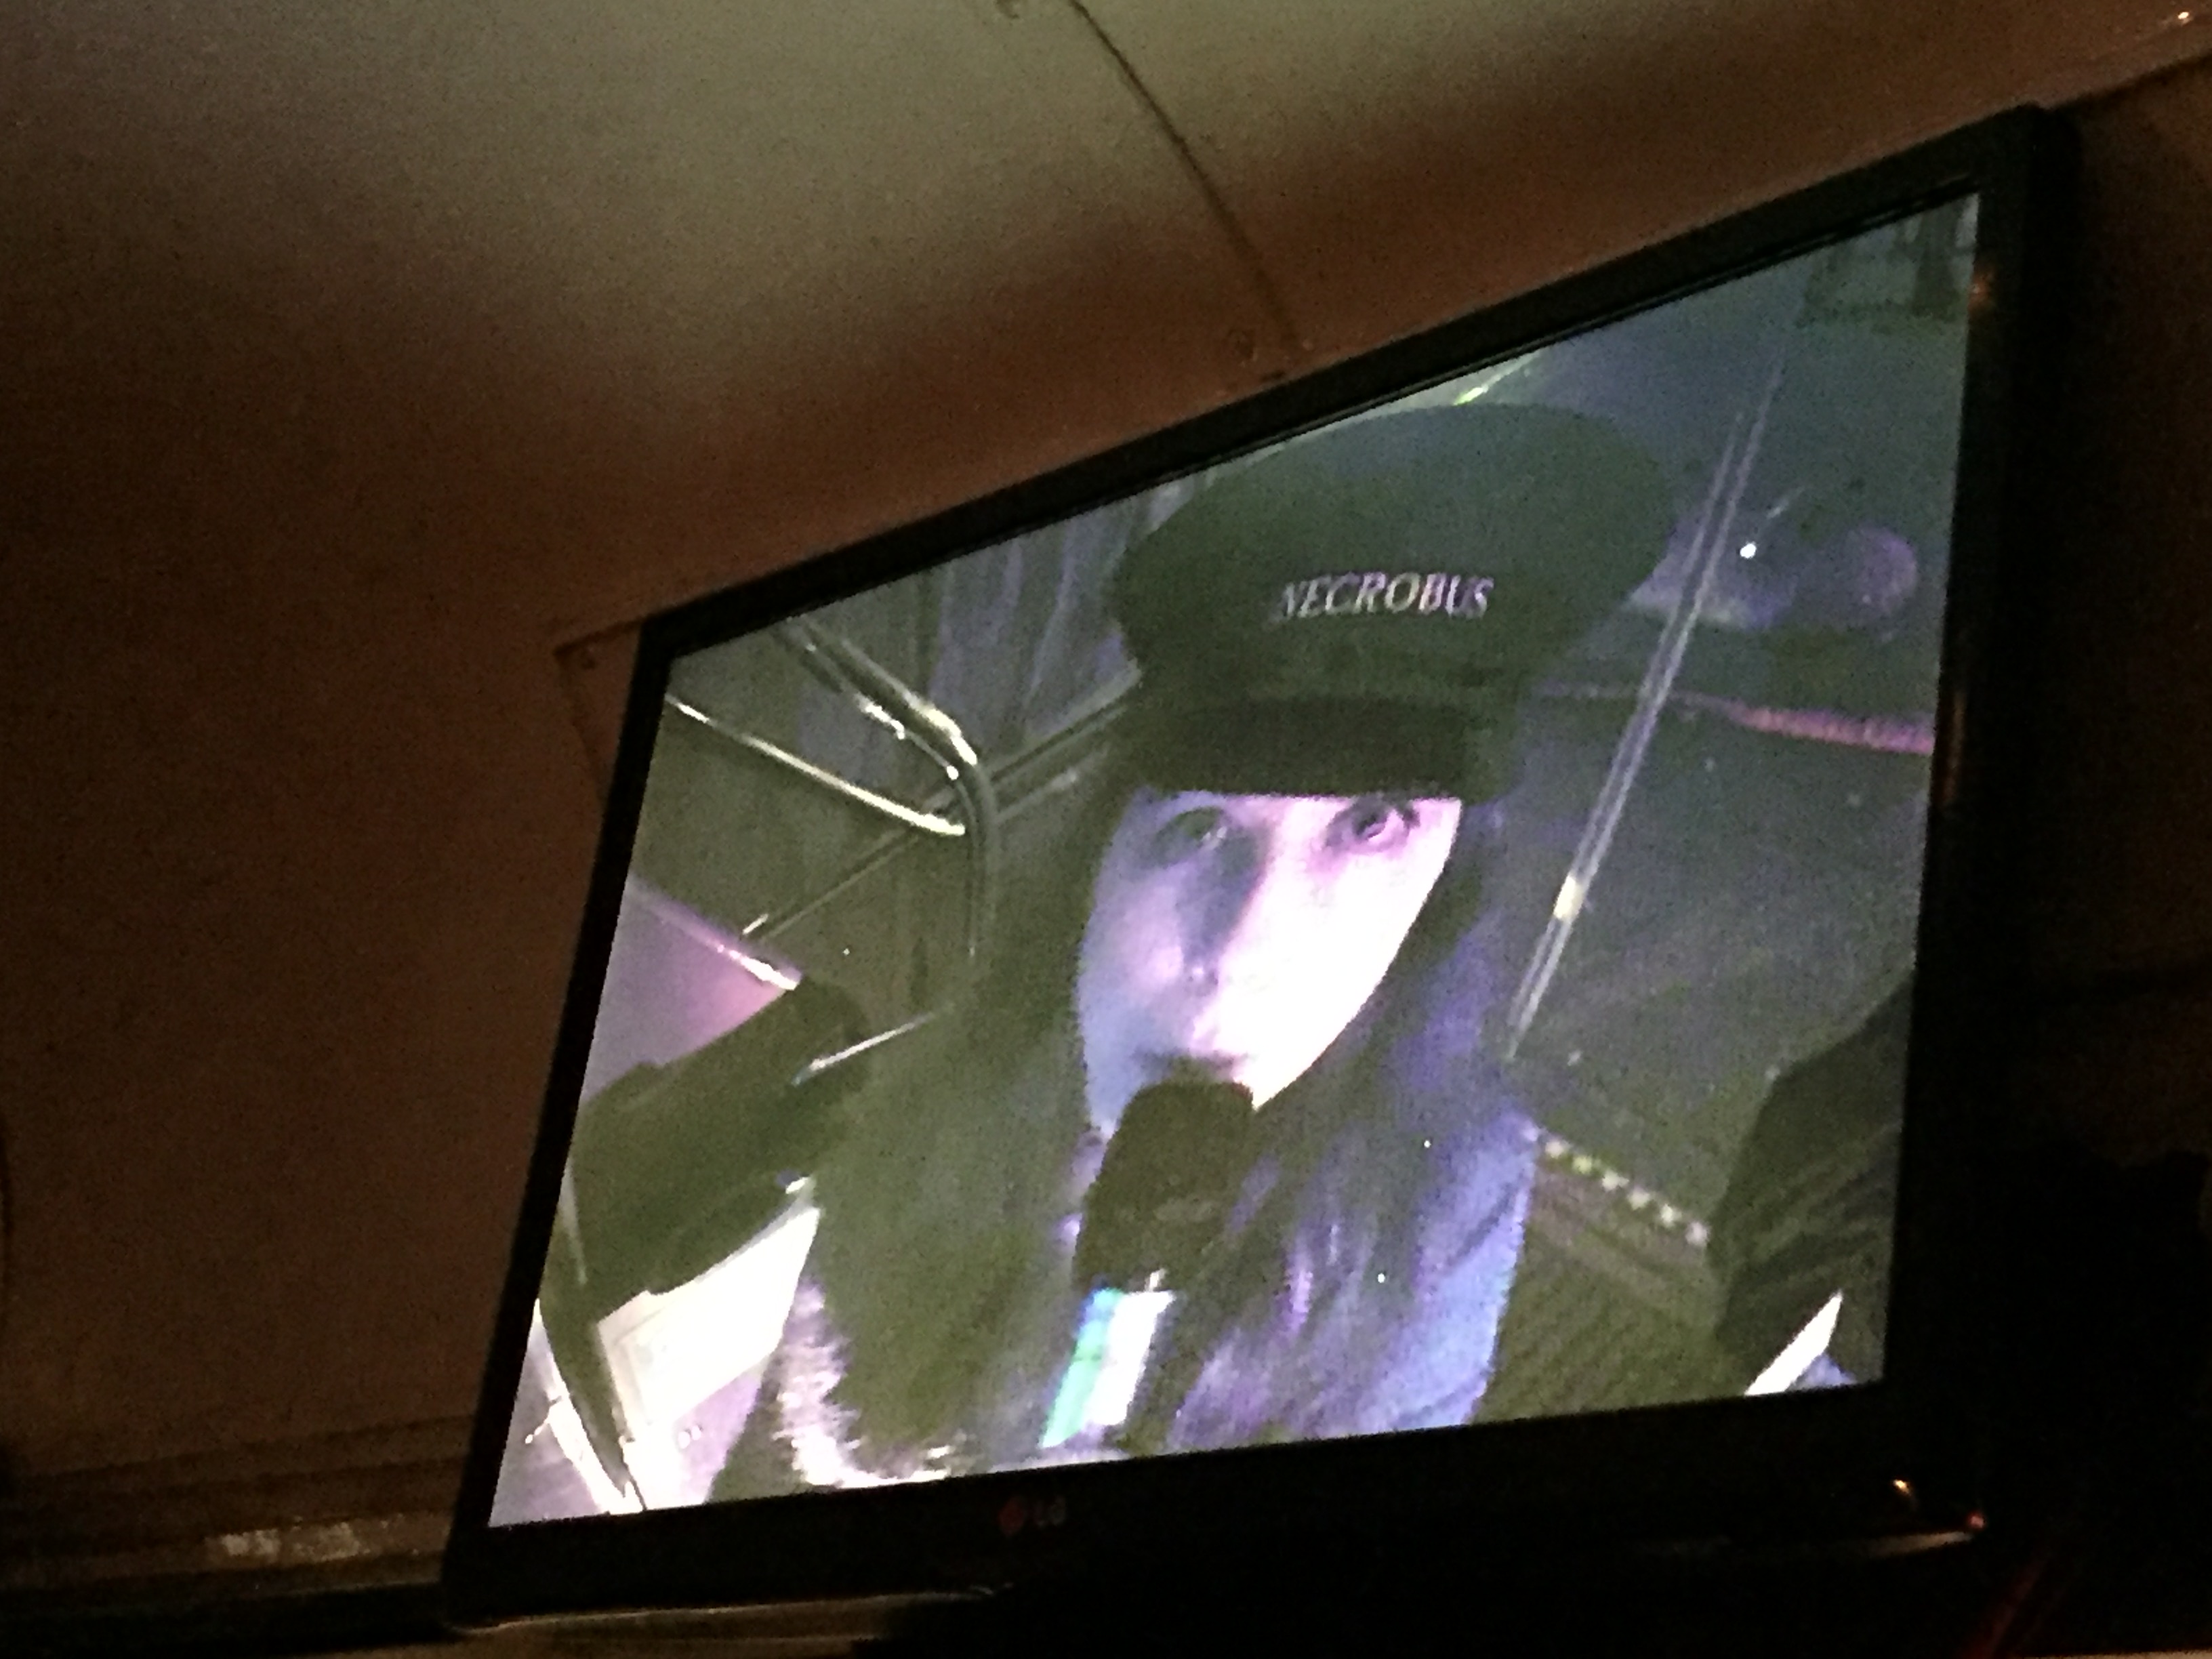 Lady tour guide on the bus, wearing a black hat with the word Necrobus on it and dark clothes. She is holding a microphone and looking at the camera, and we are viewing her on a monitor on the upper deck of the bus.